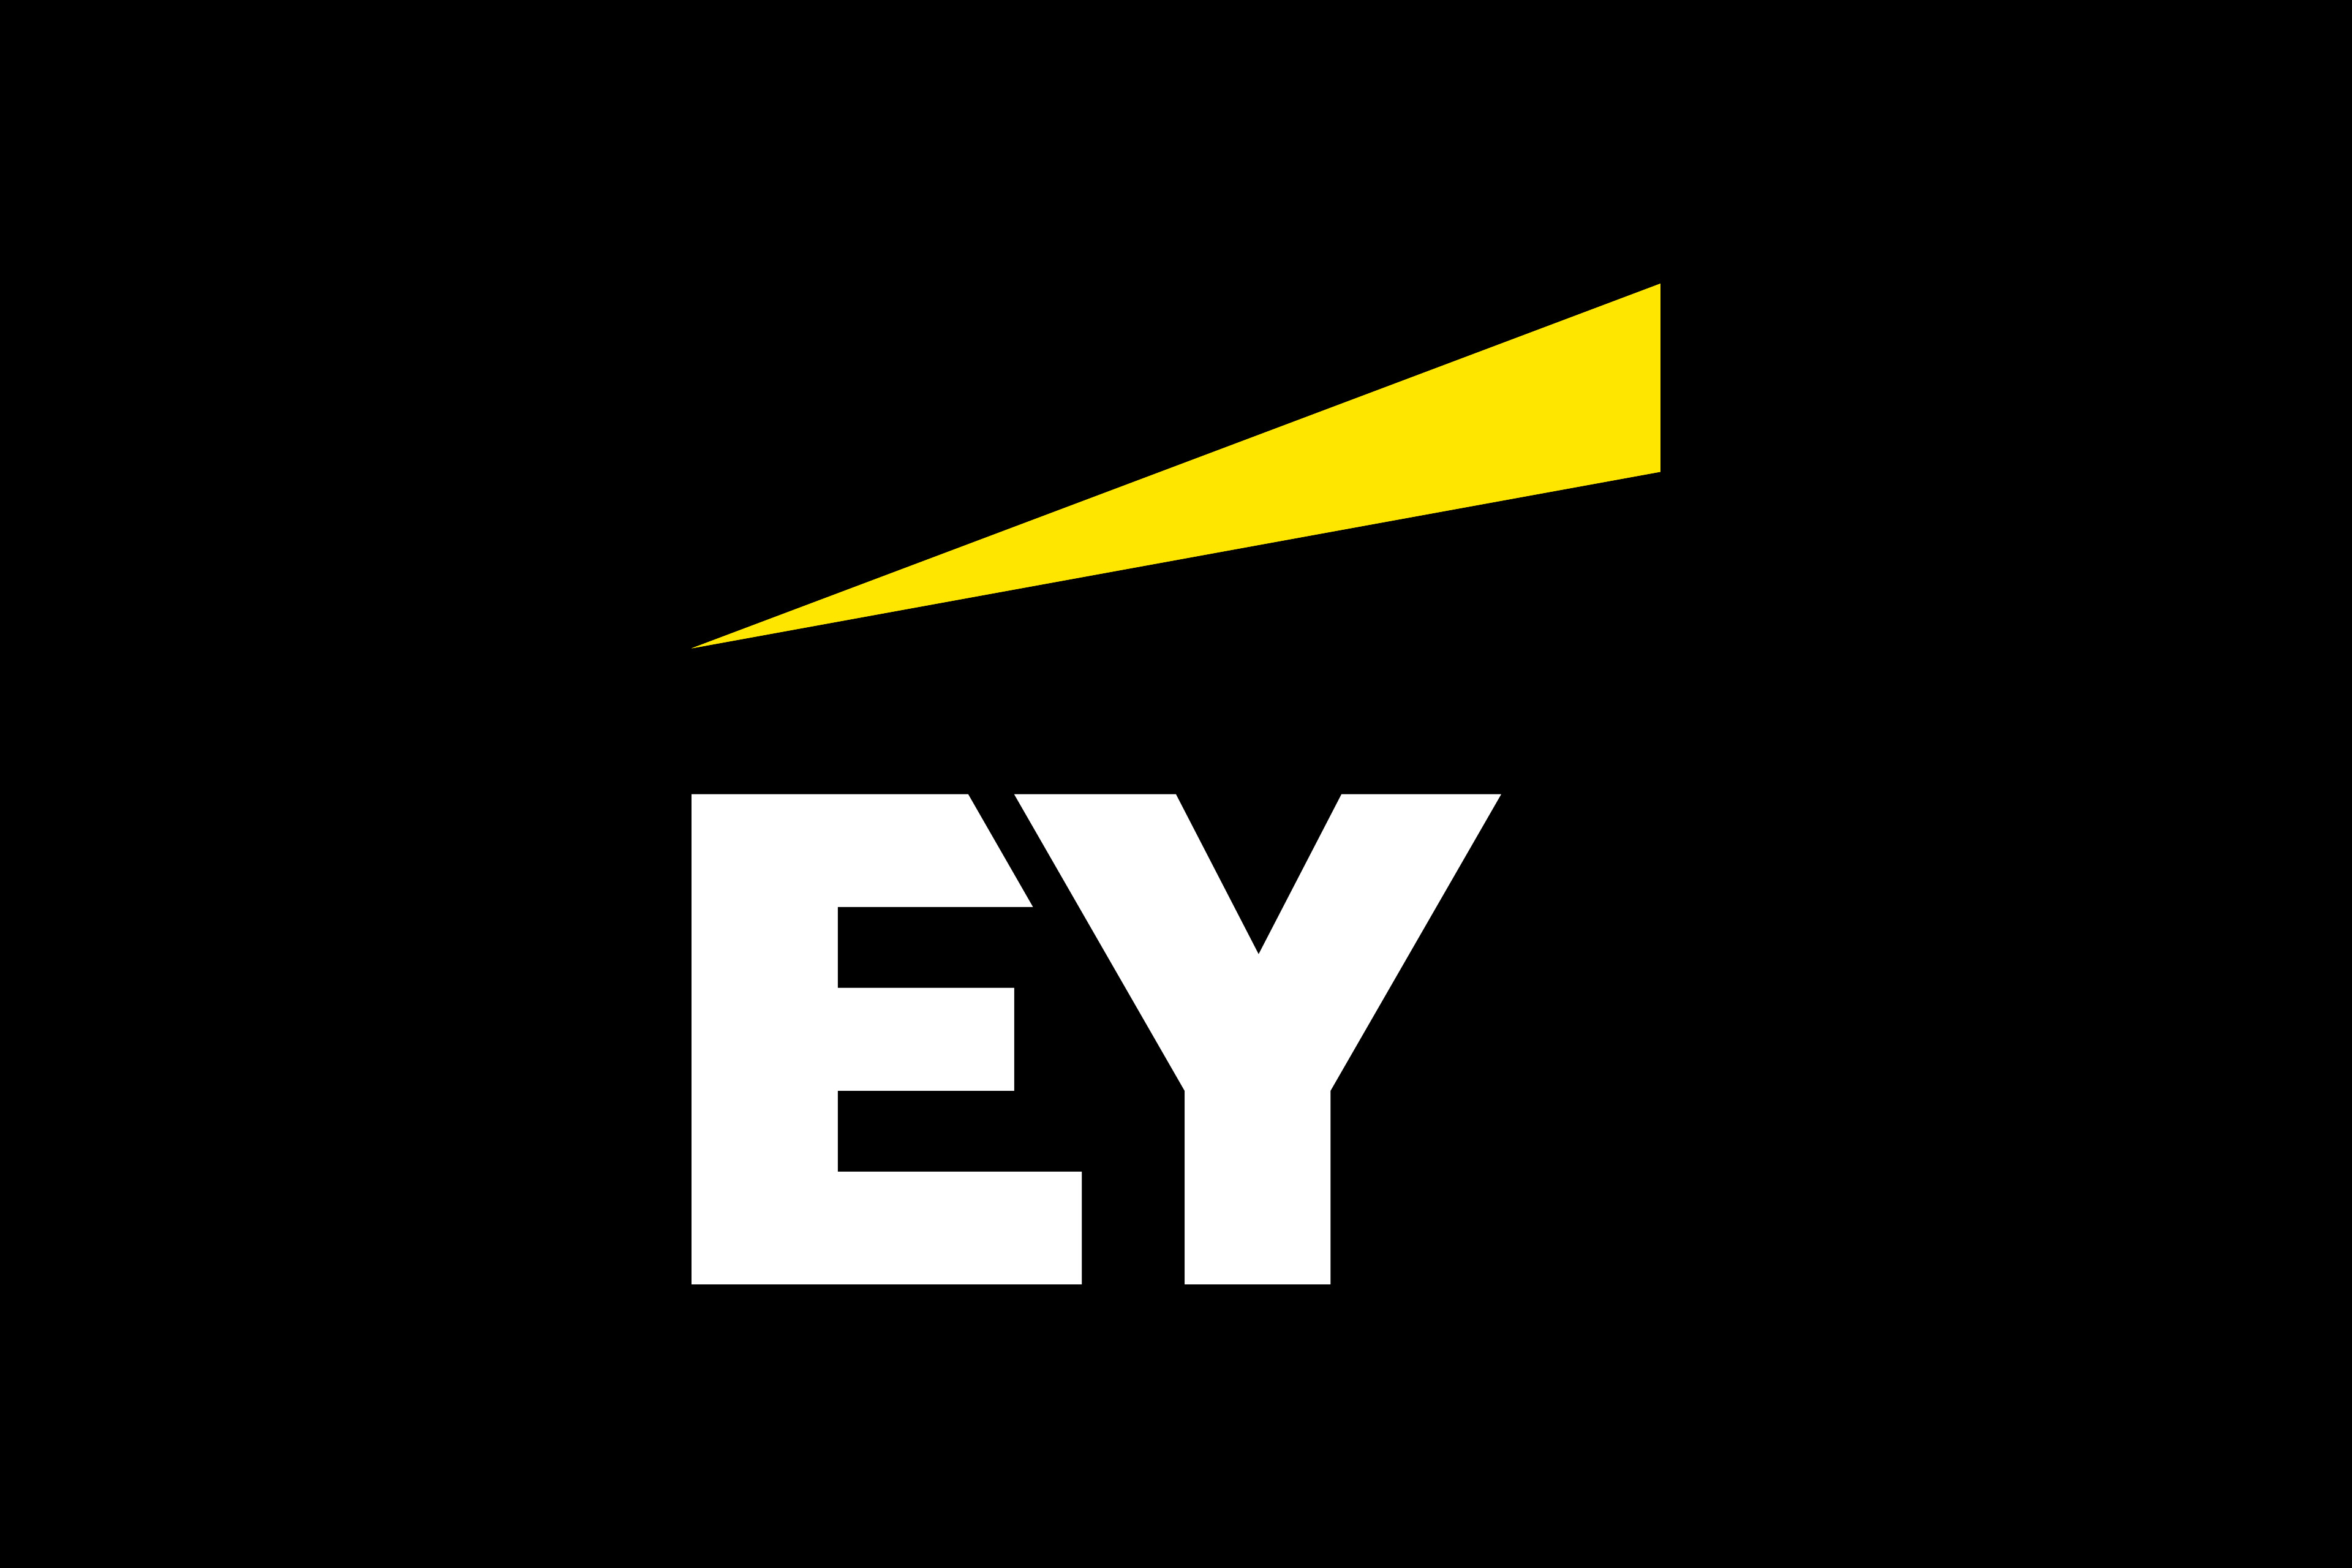 Best works. Ernst and young лого. Логотип y e. Ey логотип вектор. Ernst and young Россия.